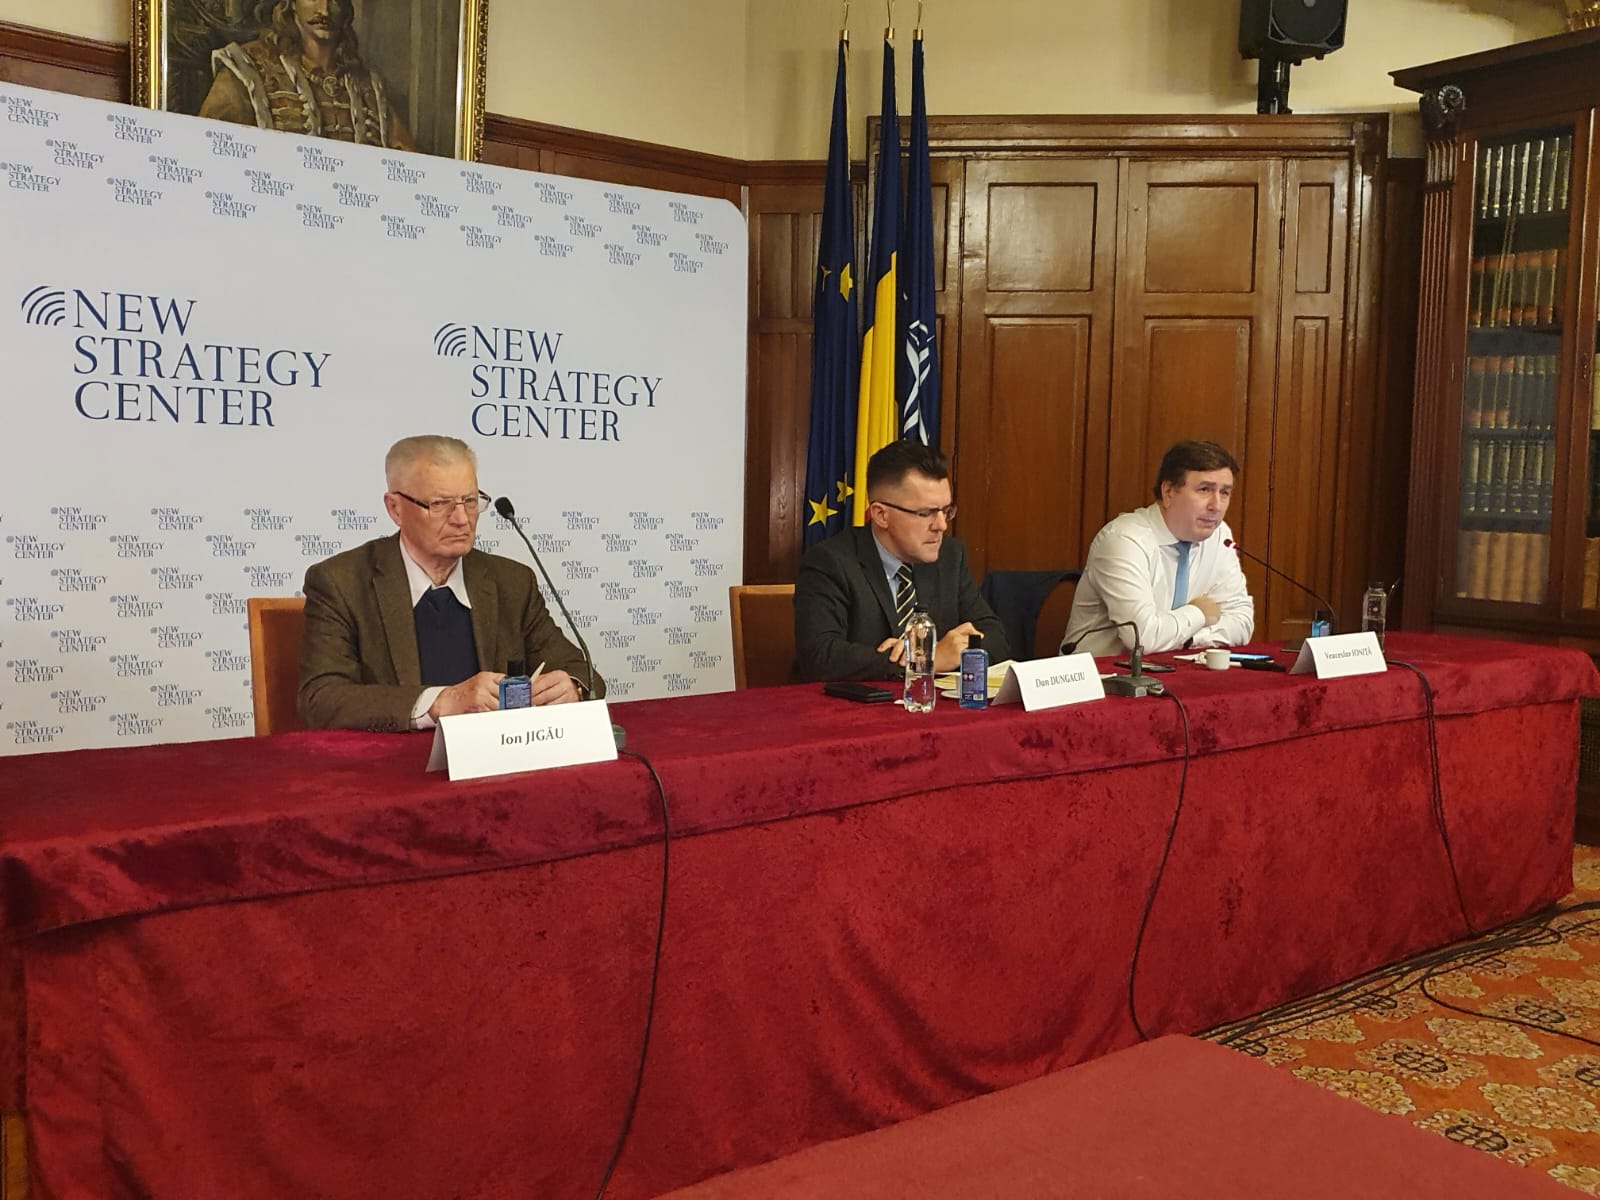 Presentation of the results of an opinion poll on economic, social and political developments in the Republic of Moldova